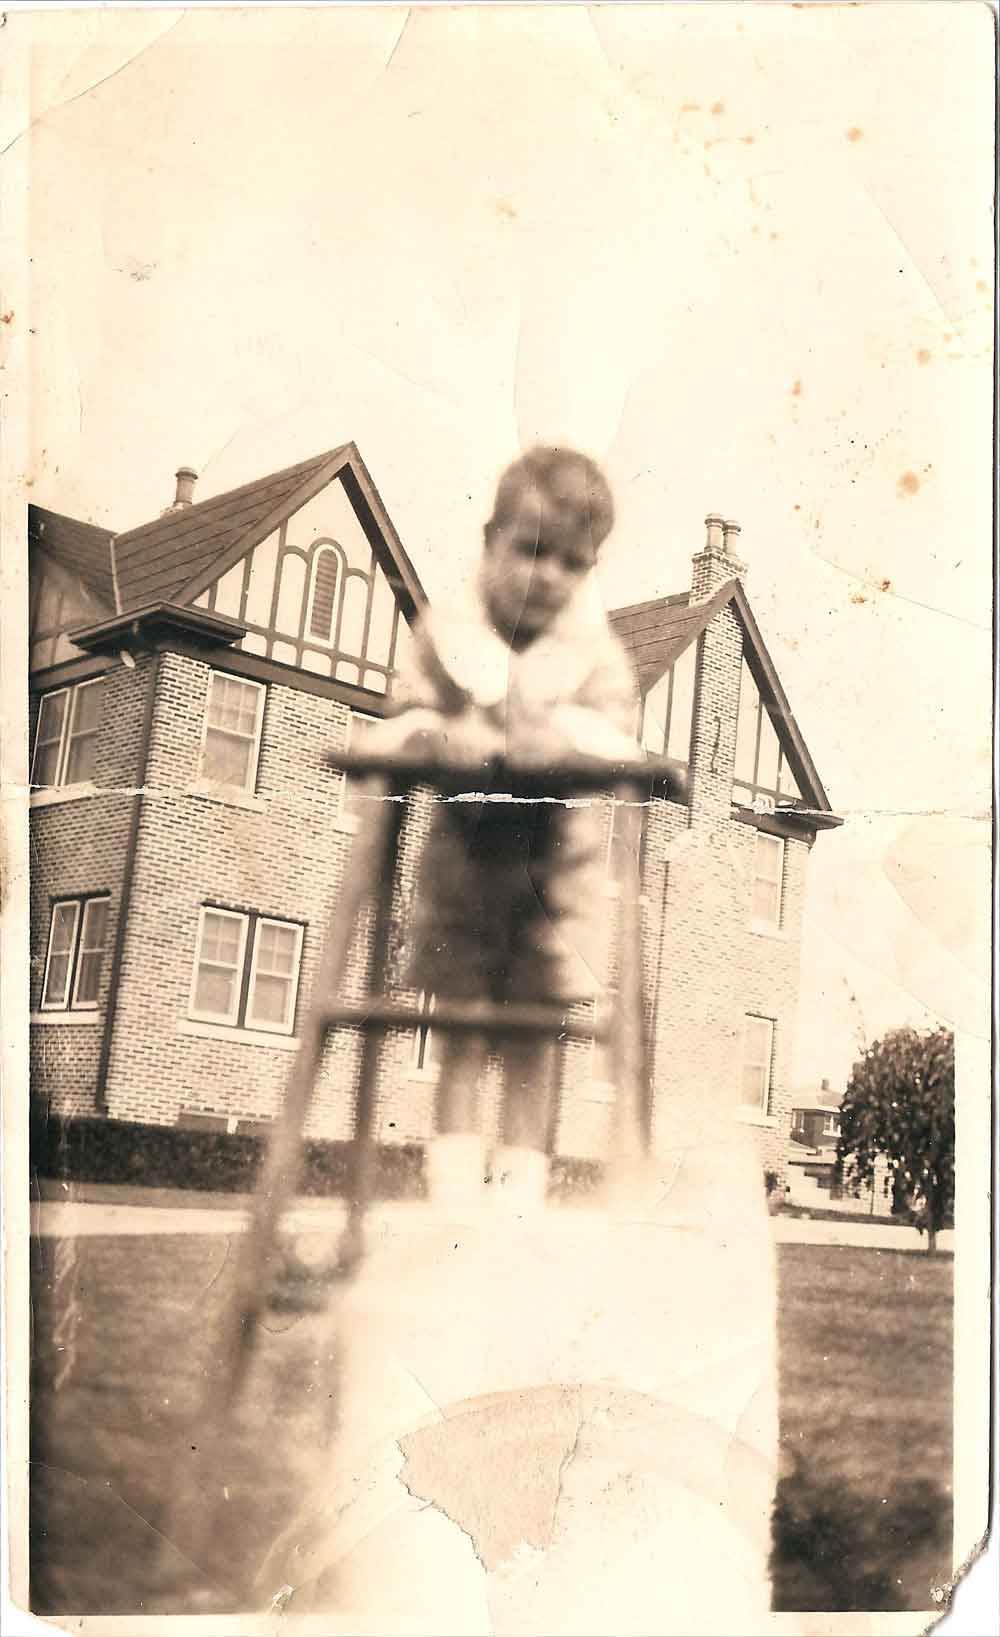 (HTC.2010.8.33) - Frank Hightower on Lawn of 409 NW 21 (2203 N Hudson in background), c. 1927